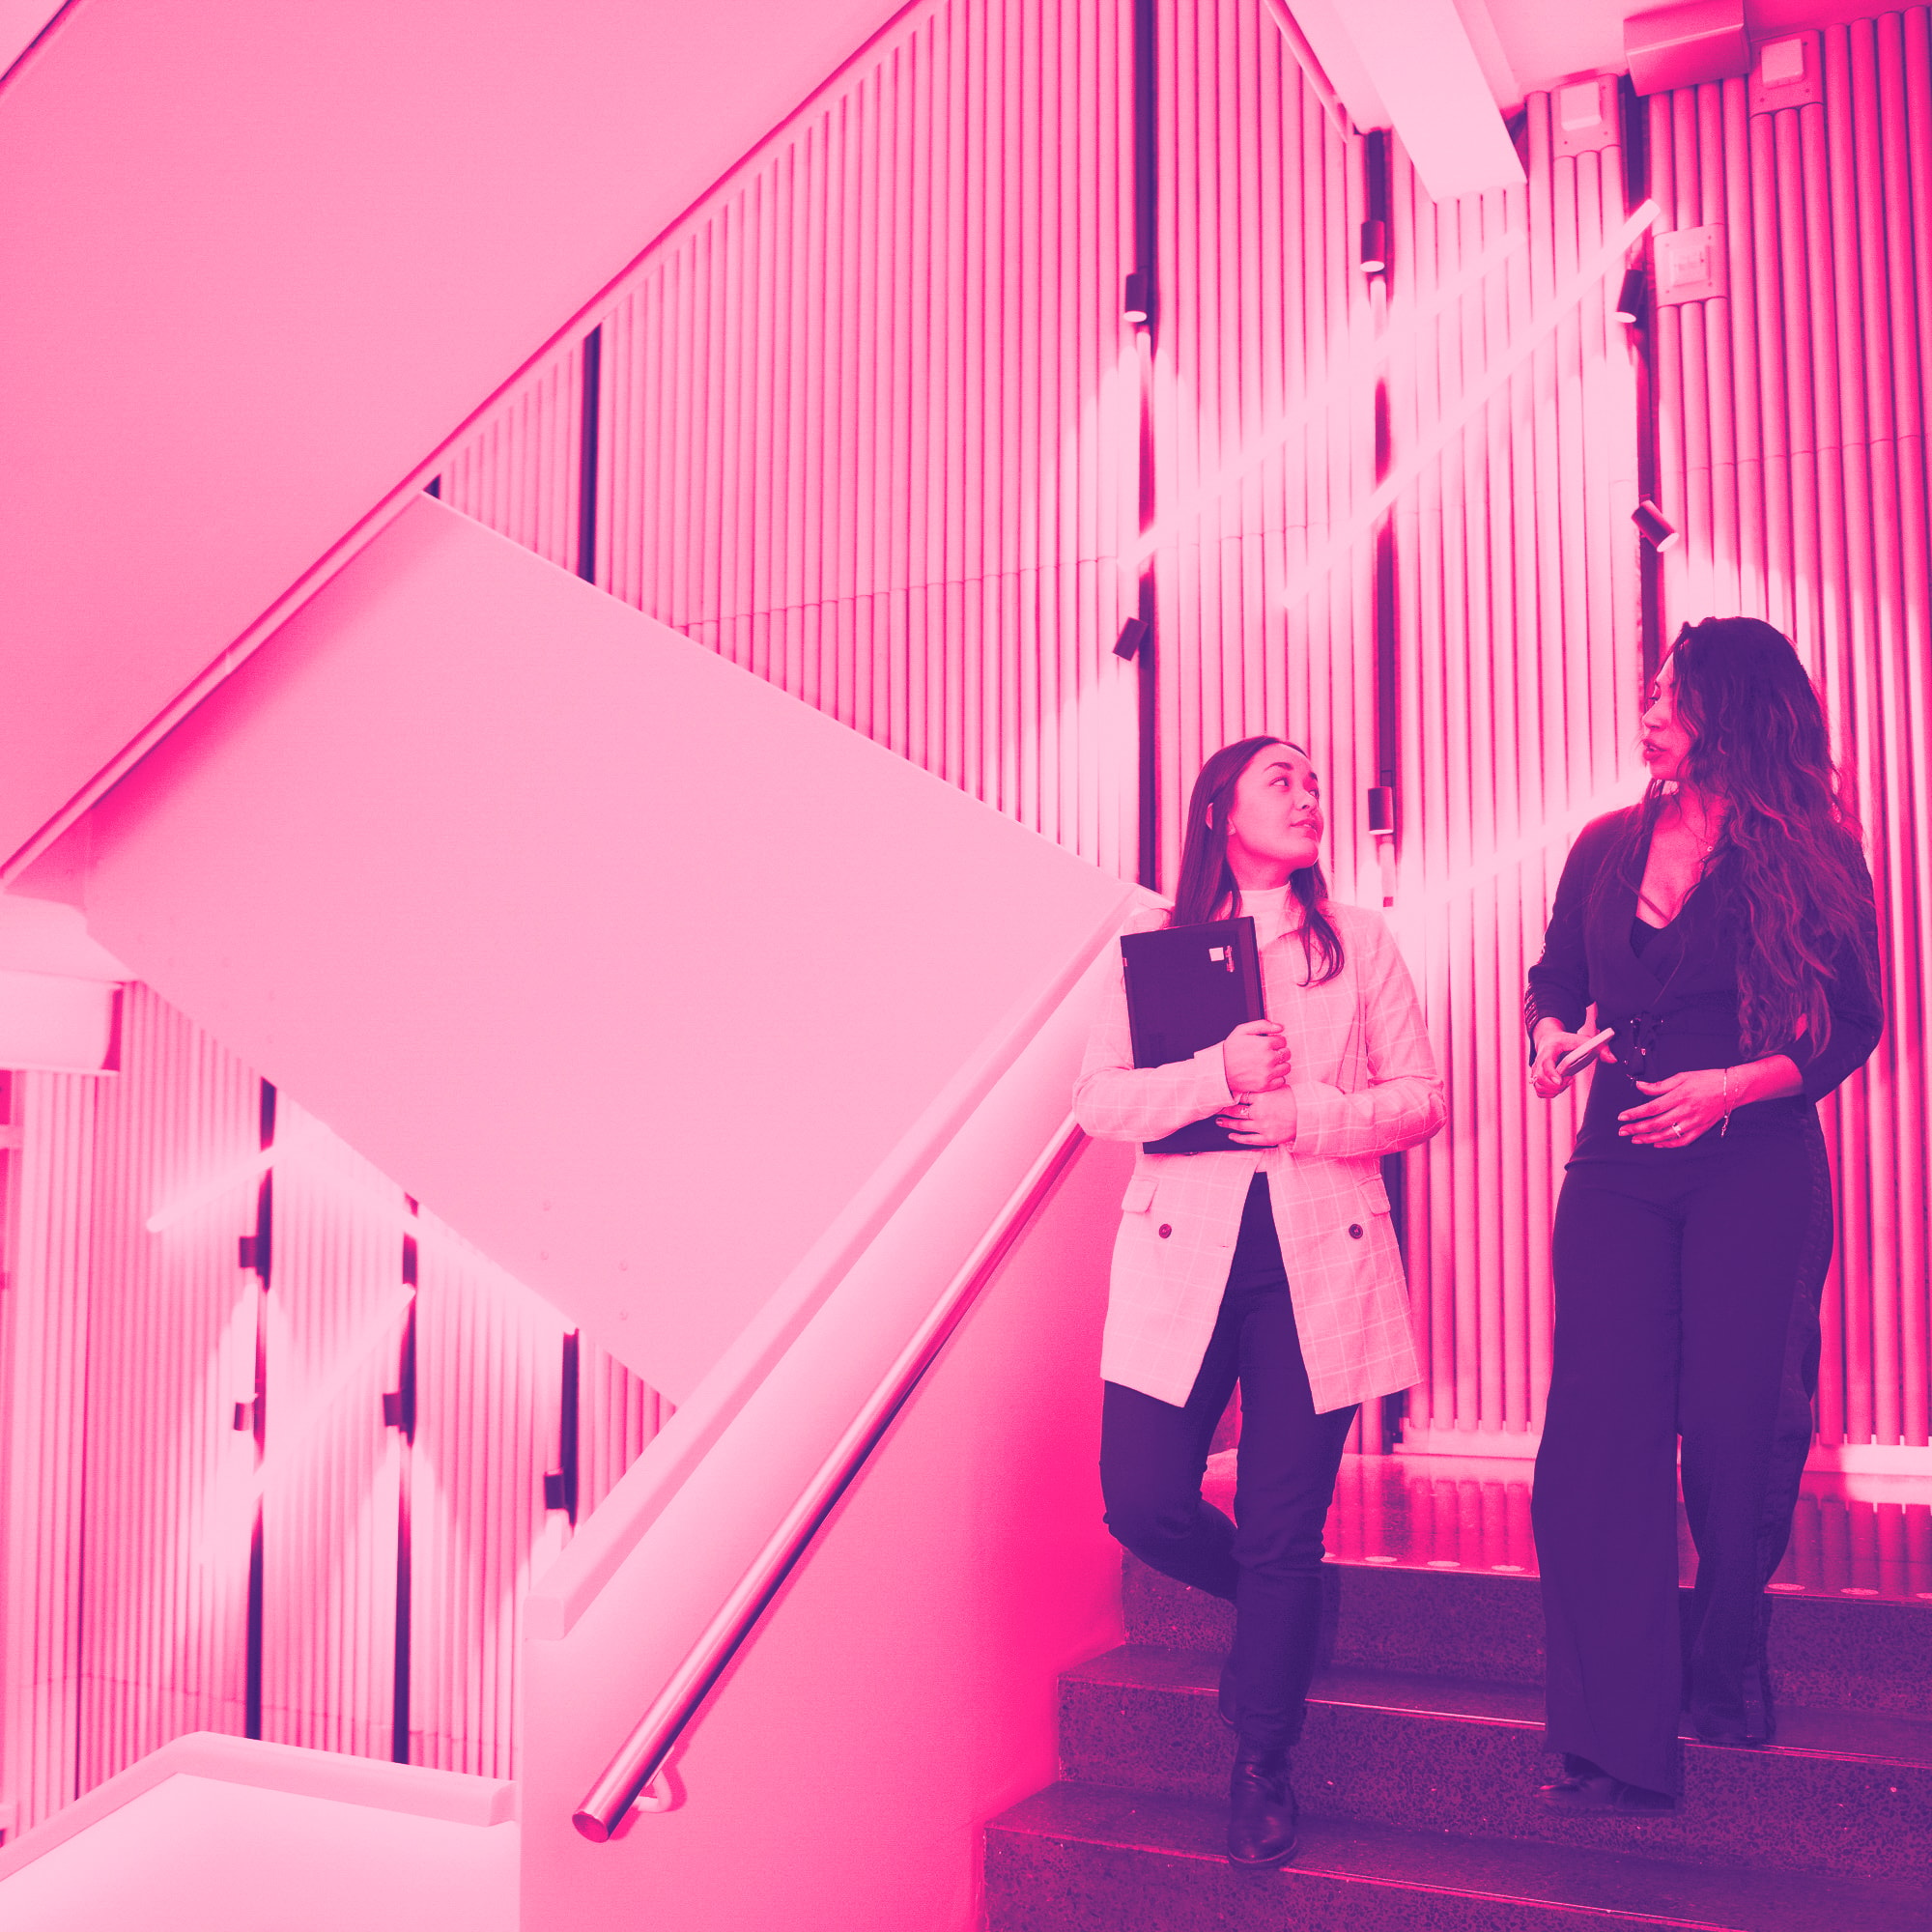 Two women arguing on their way down a flight of stairs. With pink filter